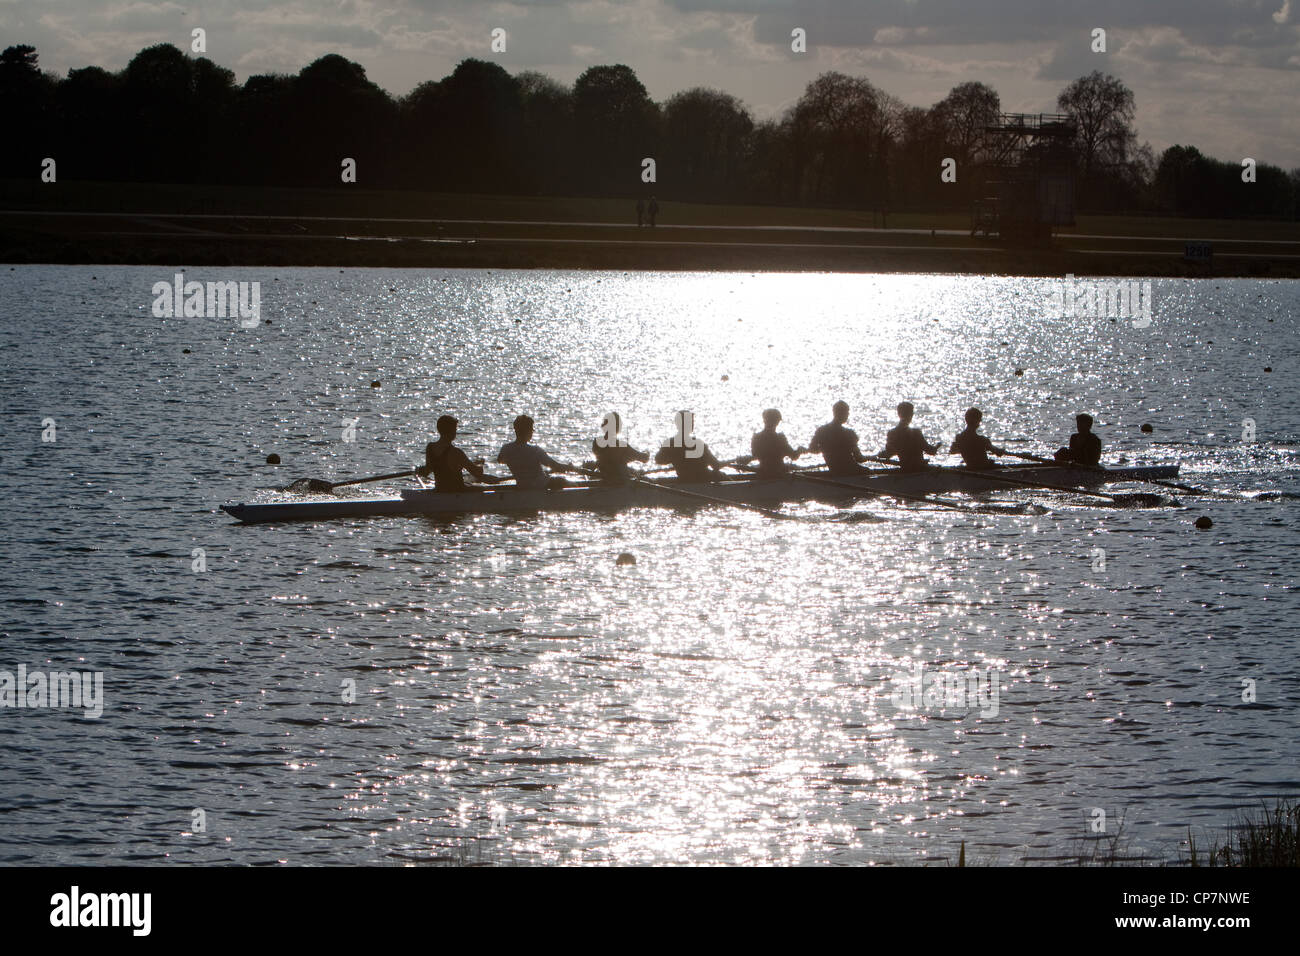 Silhouette of rowers practicing on Dorney Lake. Dorney Lake will be a venue for the London 2012 Olympics and Paralympics. Stock Photo